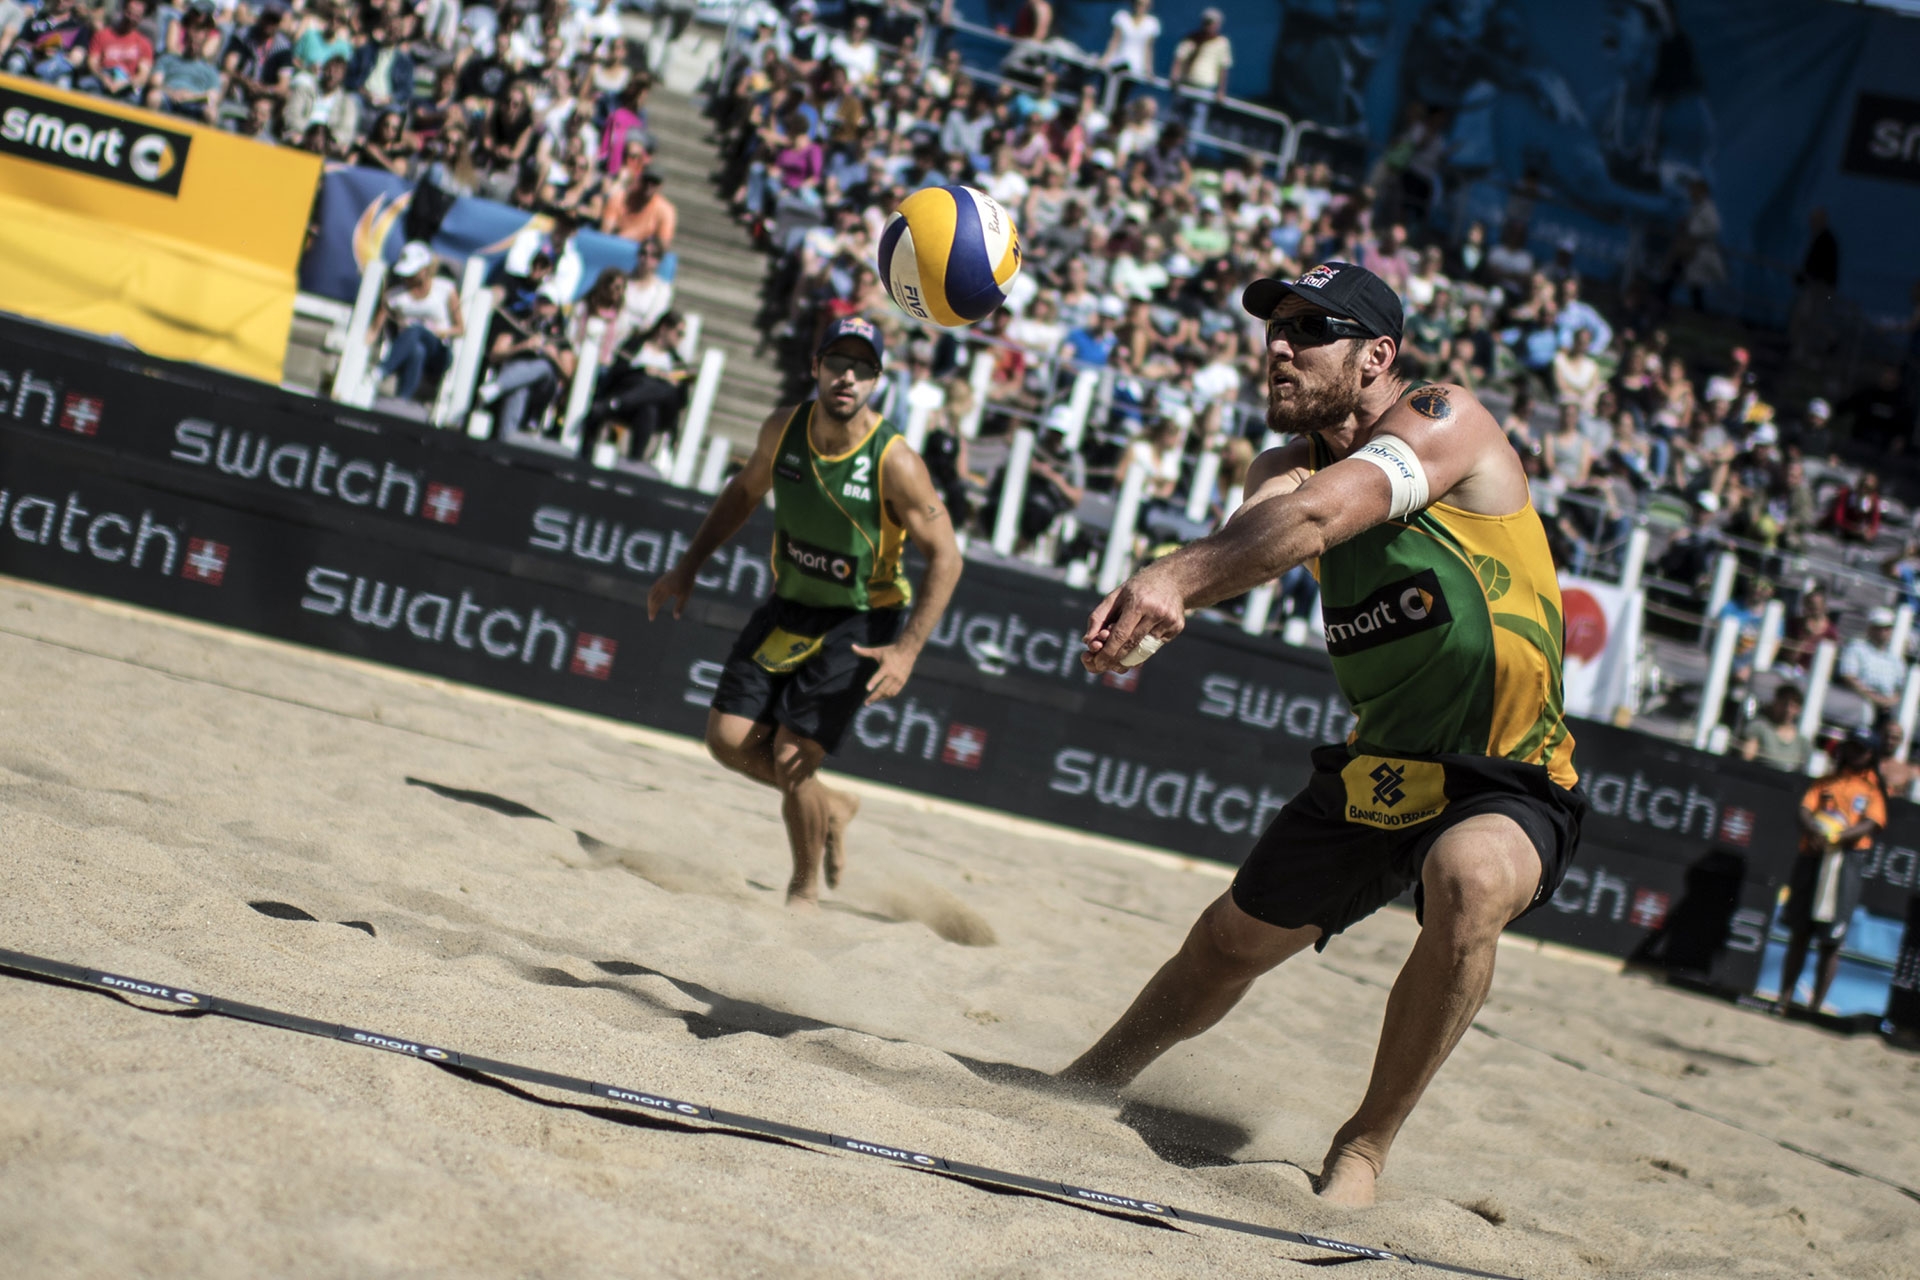 Can Brazil’s Alison/Bruno reach Sunday’s semifinals today? Photocredit: Joerg Mitter.